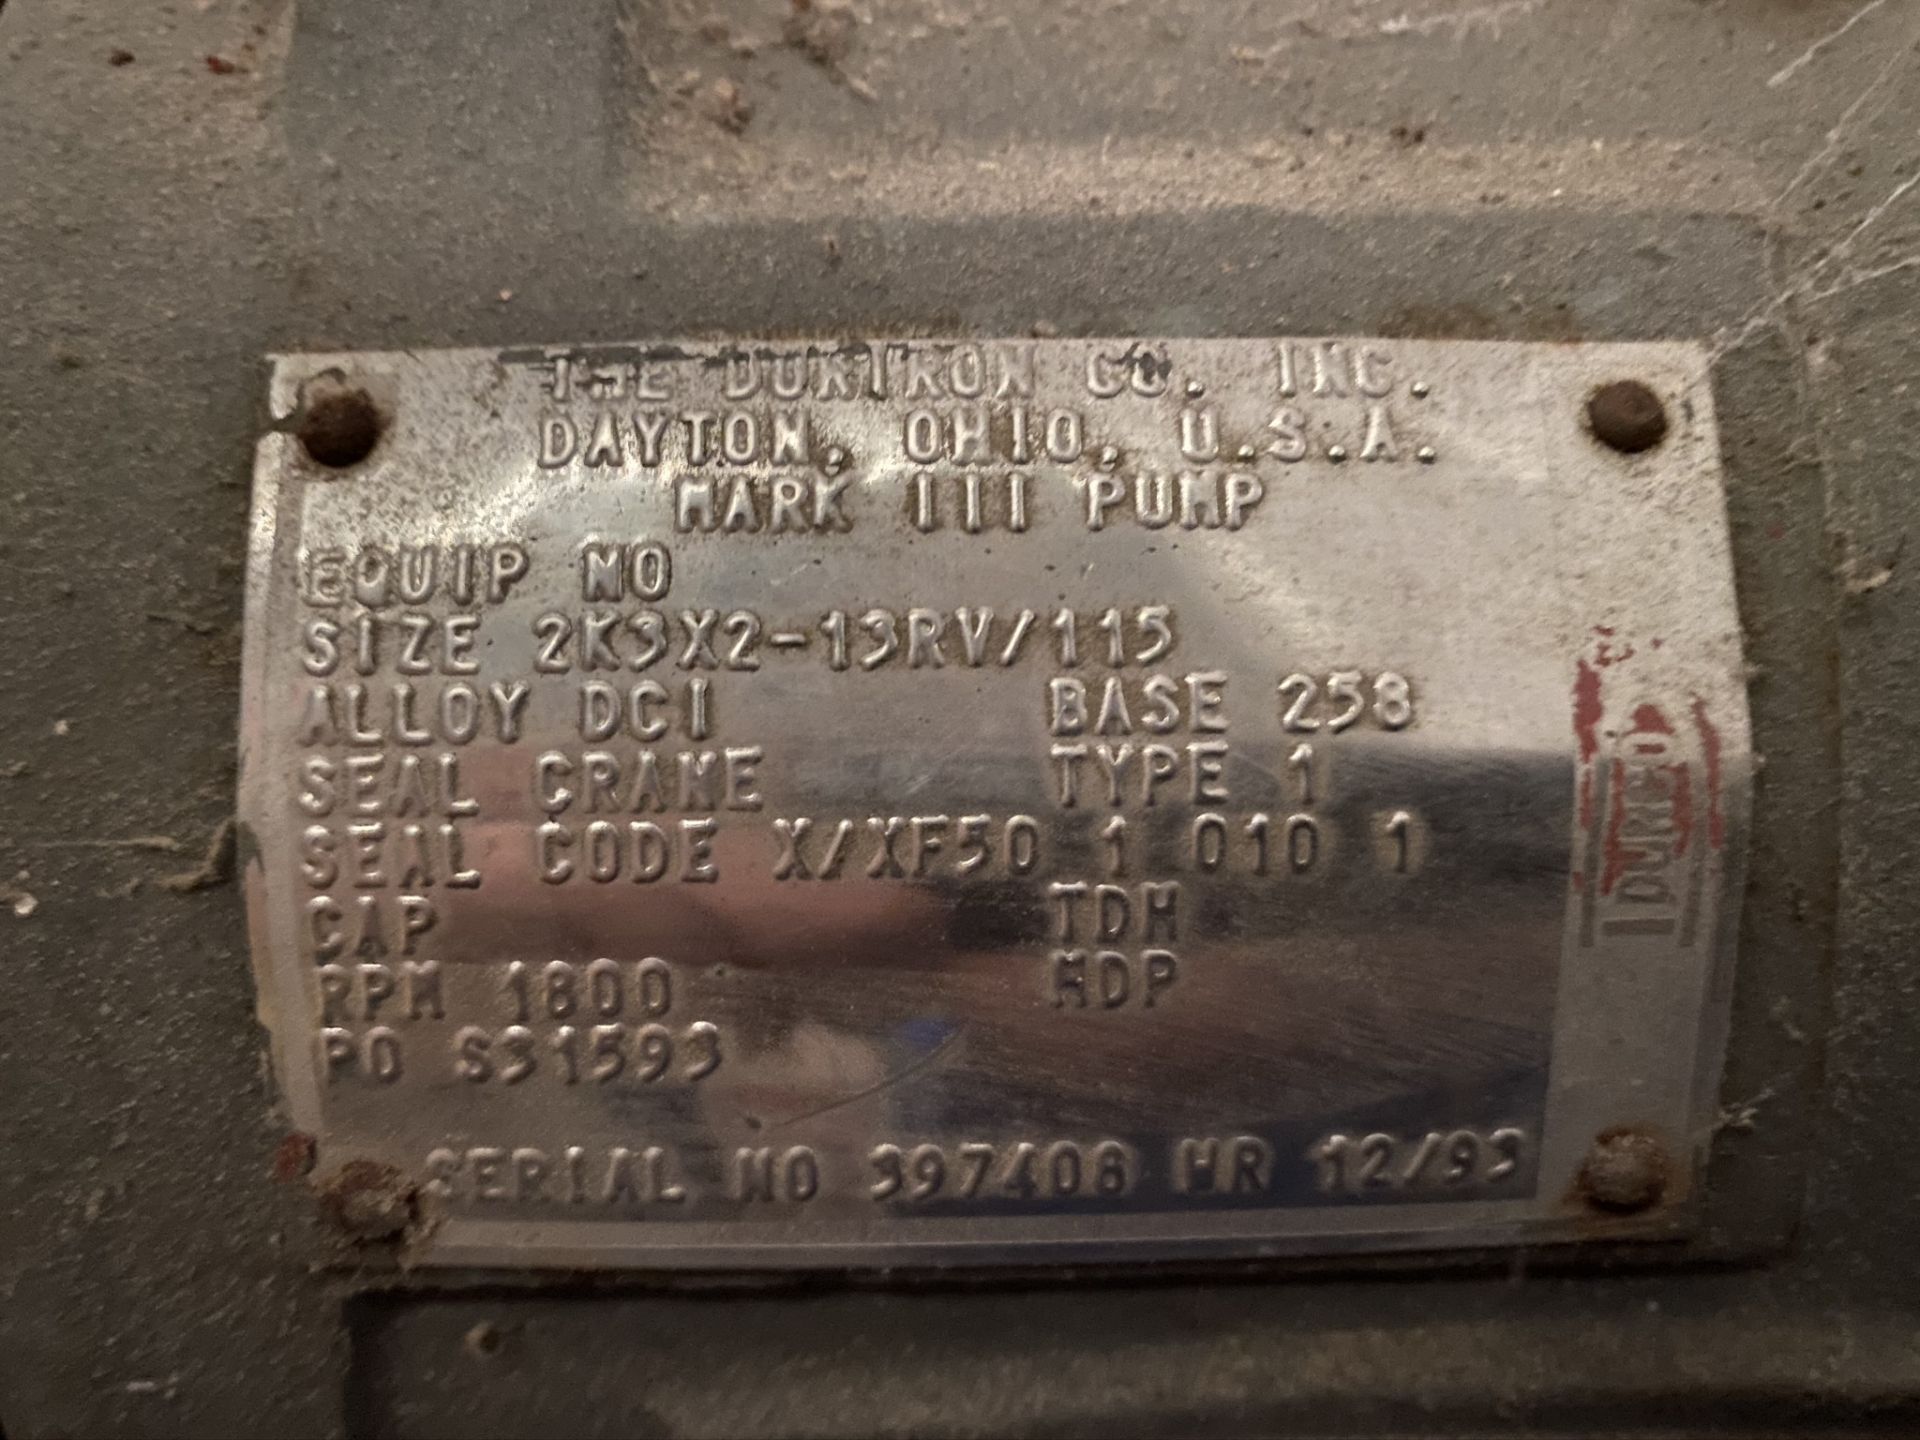 DURCO GRAY PUMPS WITH MOTOR (#2) S/N 397408 WR 12-93. (SUBJECT TO BULK BID LOT 100) (BOILER ROOM) - Image 2 of 3